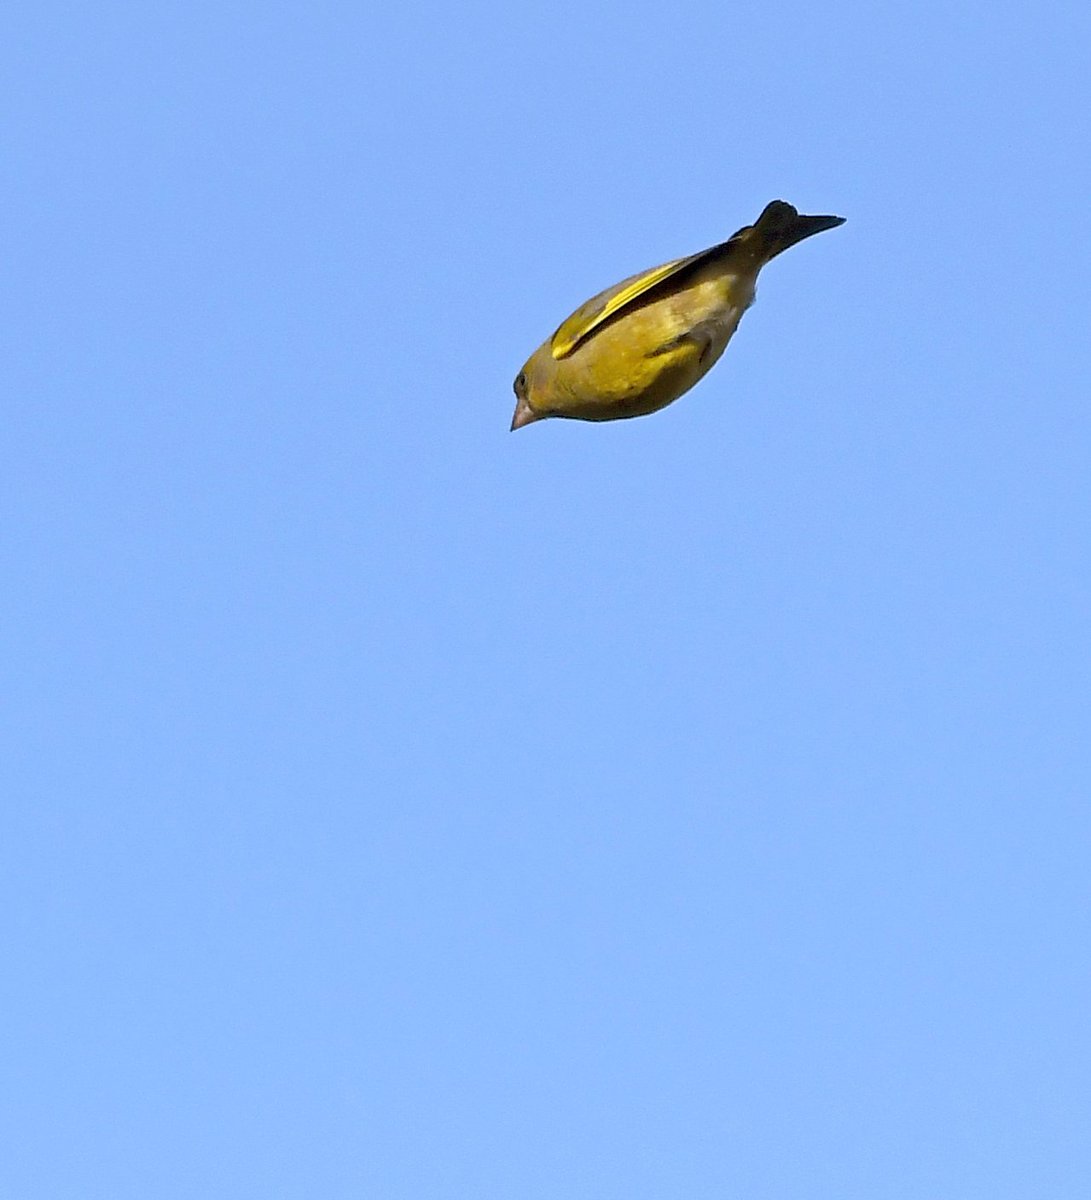 Greenfinch as a weapon! Clearly my attackers missed again, as this bird sails harmlessly over my head, but I'm constantly having to stay alert because I never know where the next launched bird is coming from! 